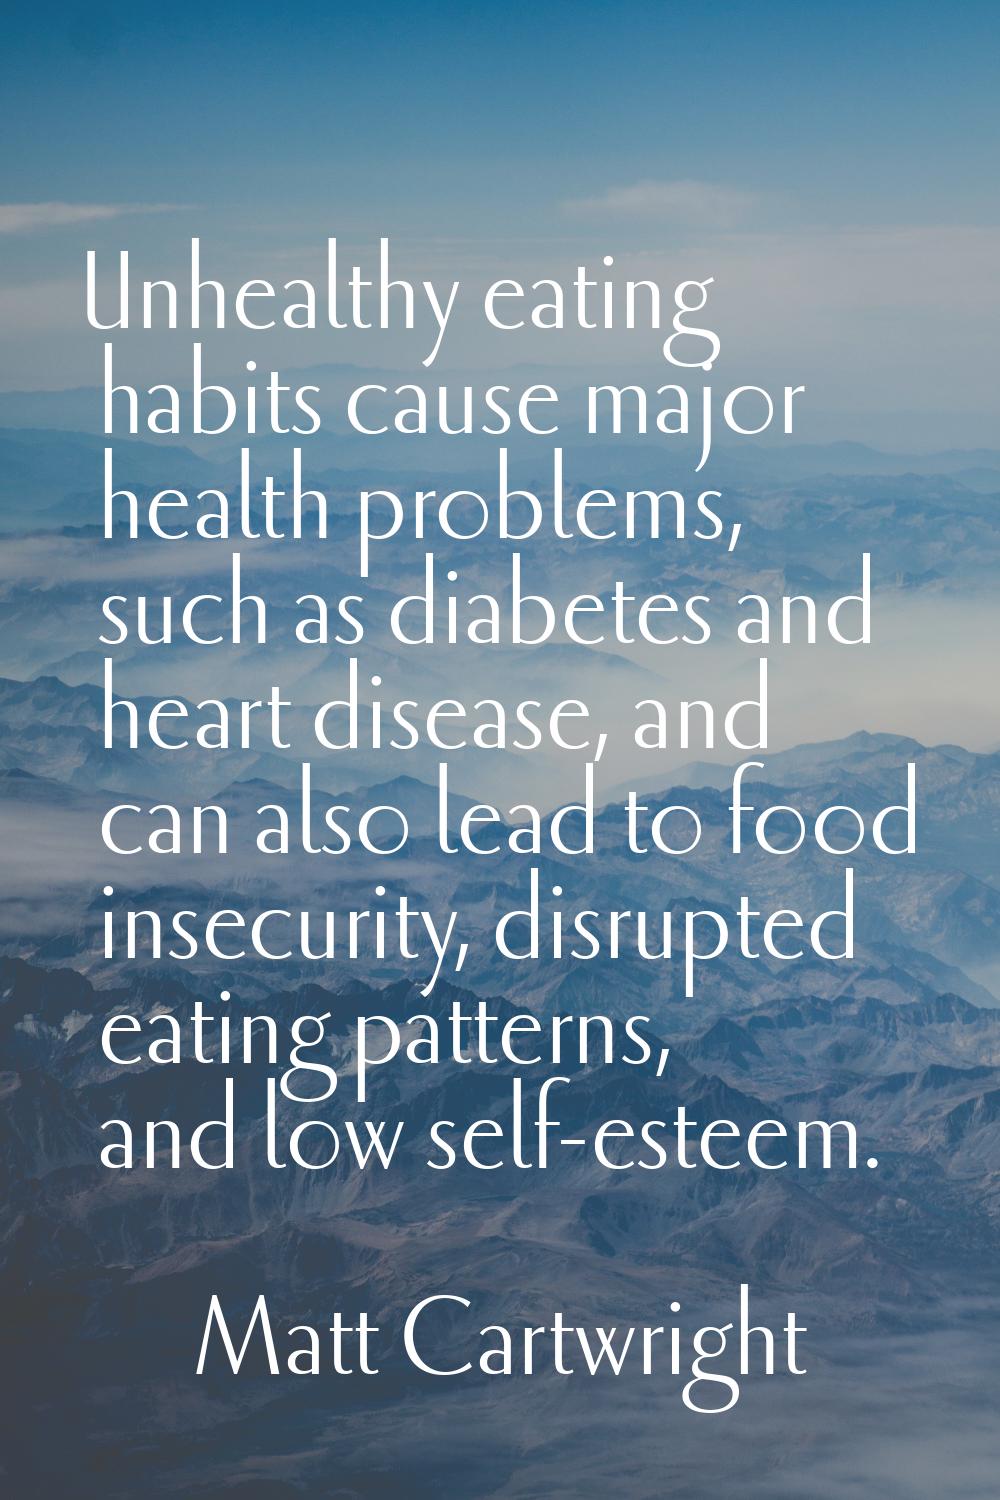 Unhealthy eating habits cause major health problems, such as diabetes and heart disease, and can al